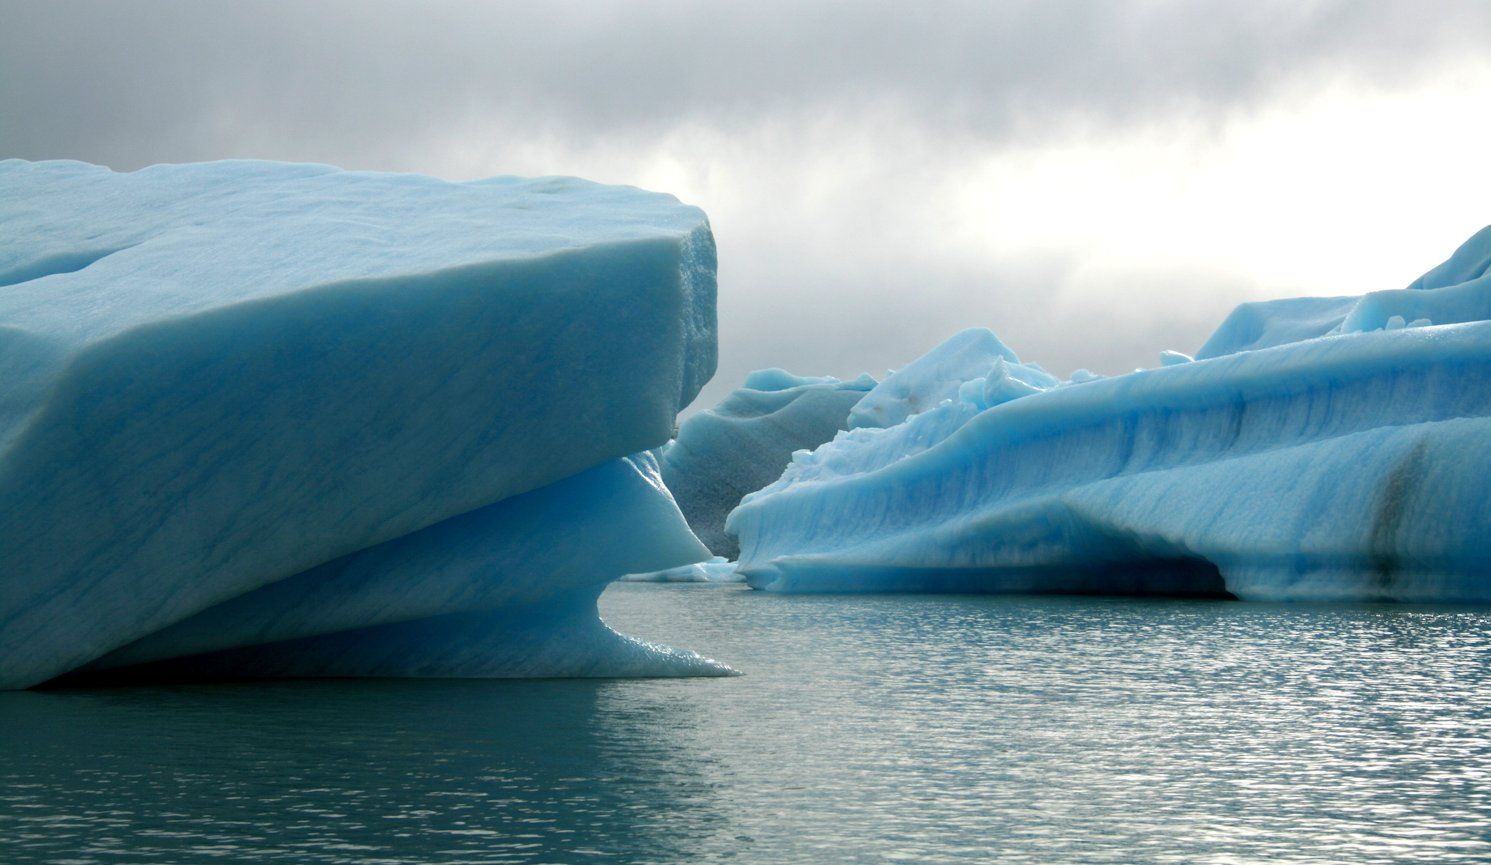 Icebergs in the ocean with a cloudy sky - Ice